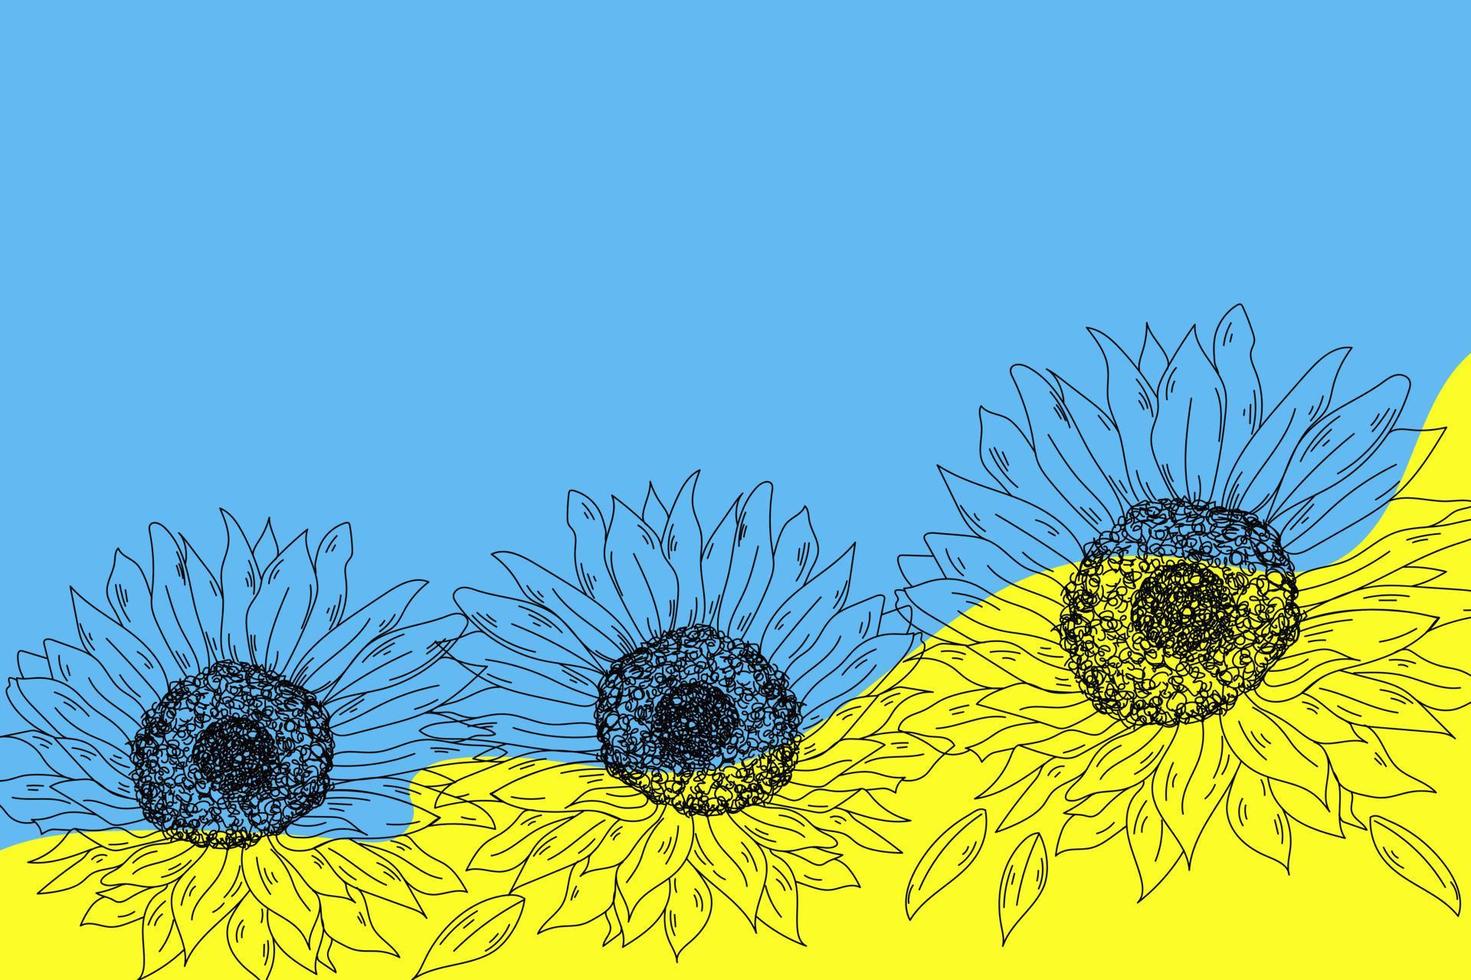 Sunflowers on the blue-yellow banner vector